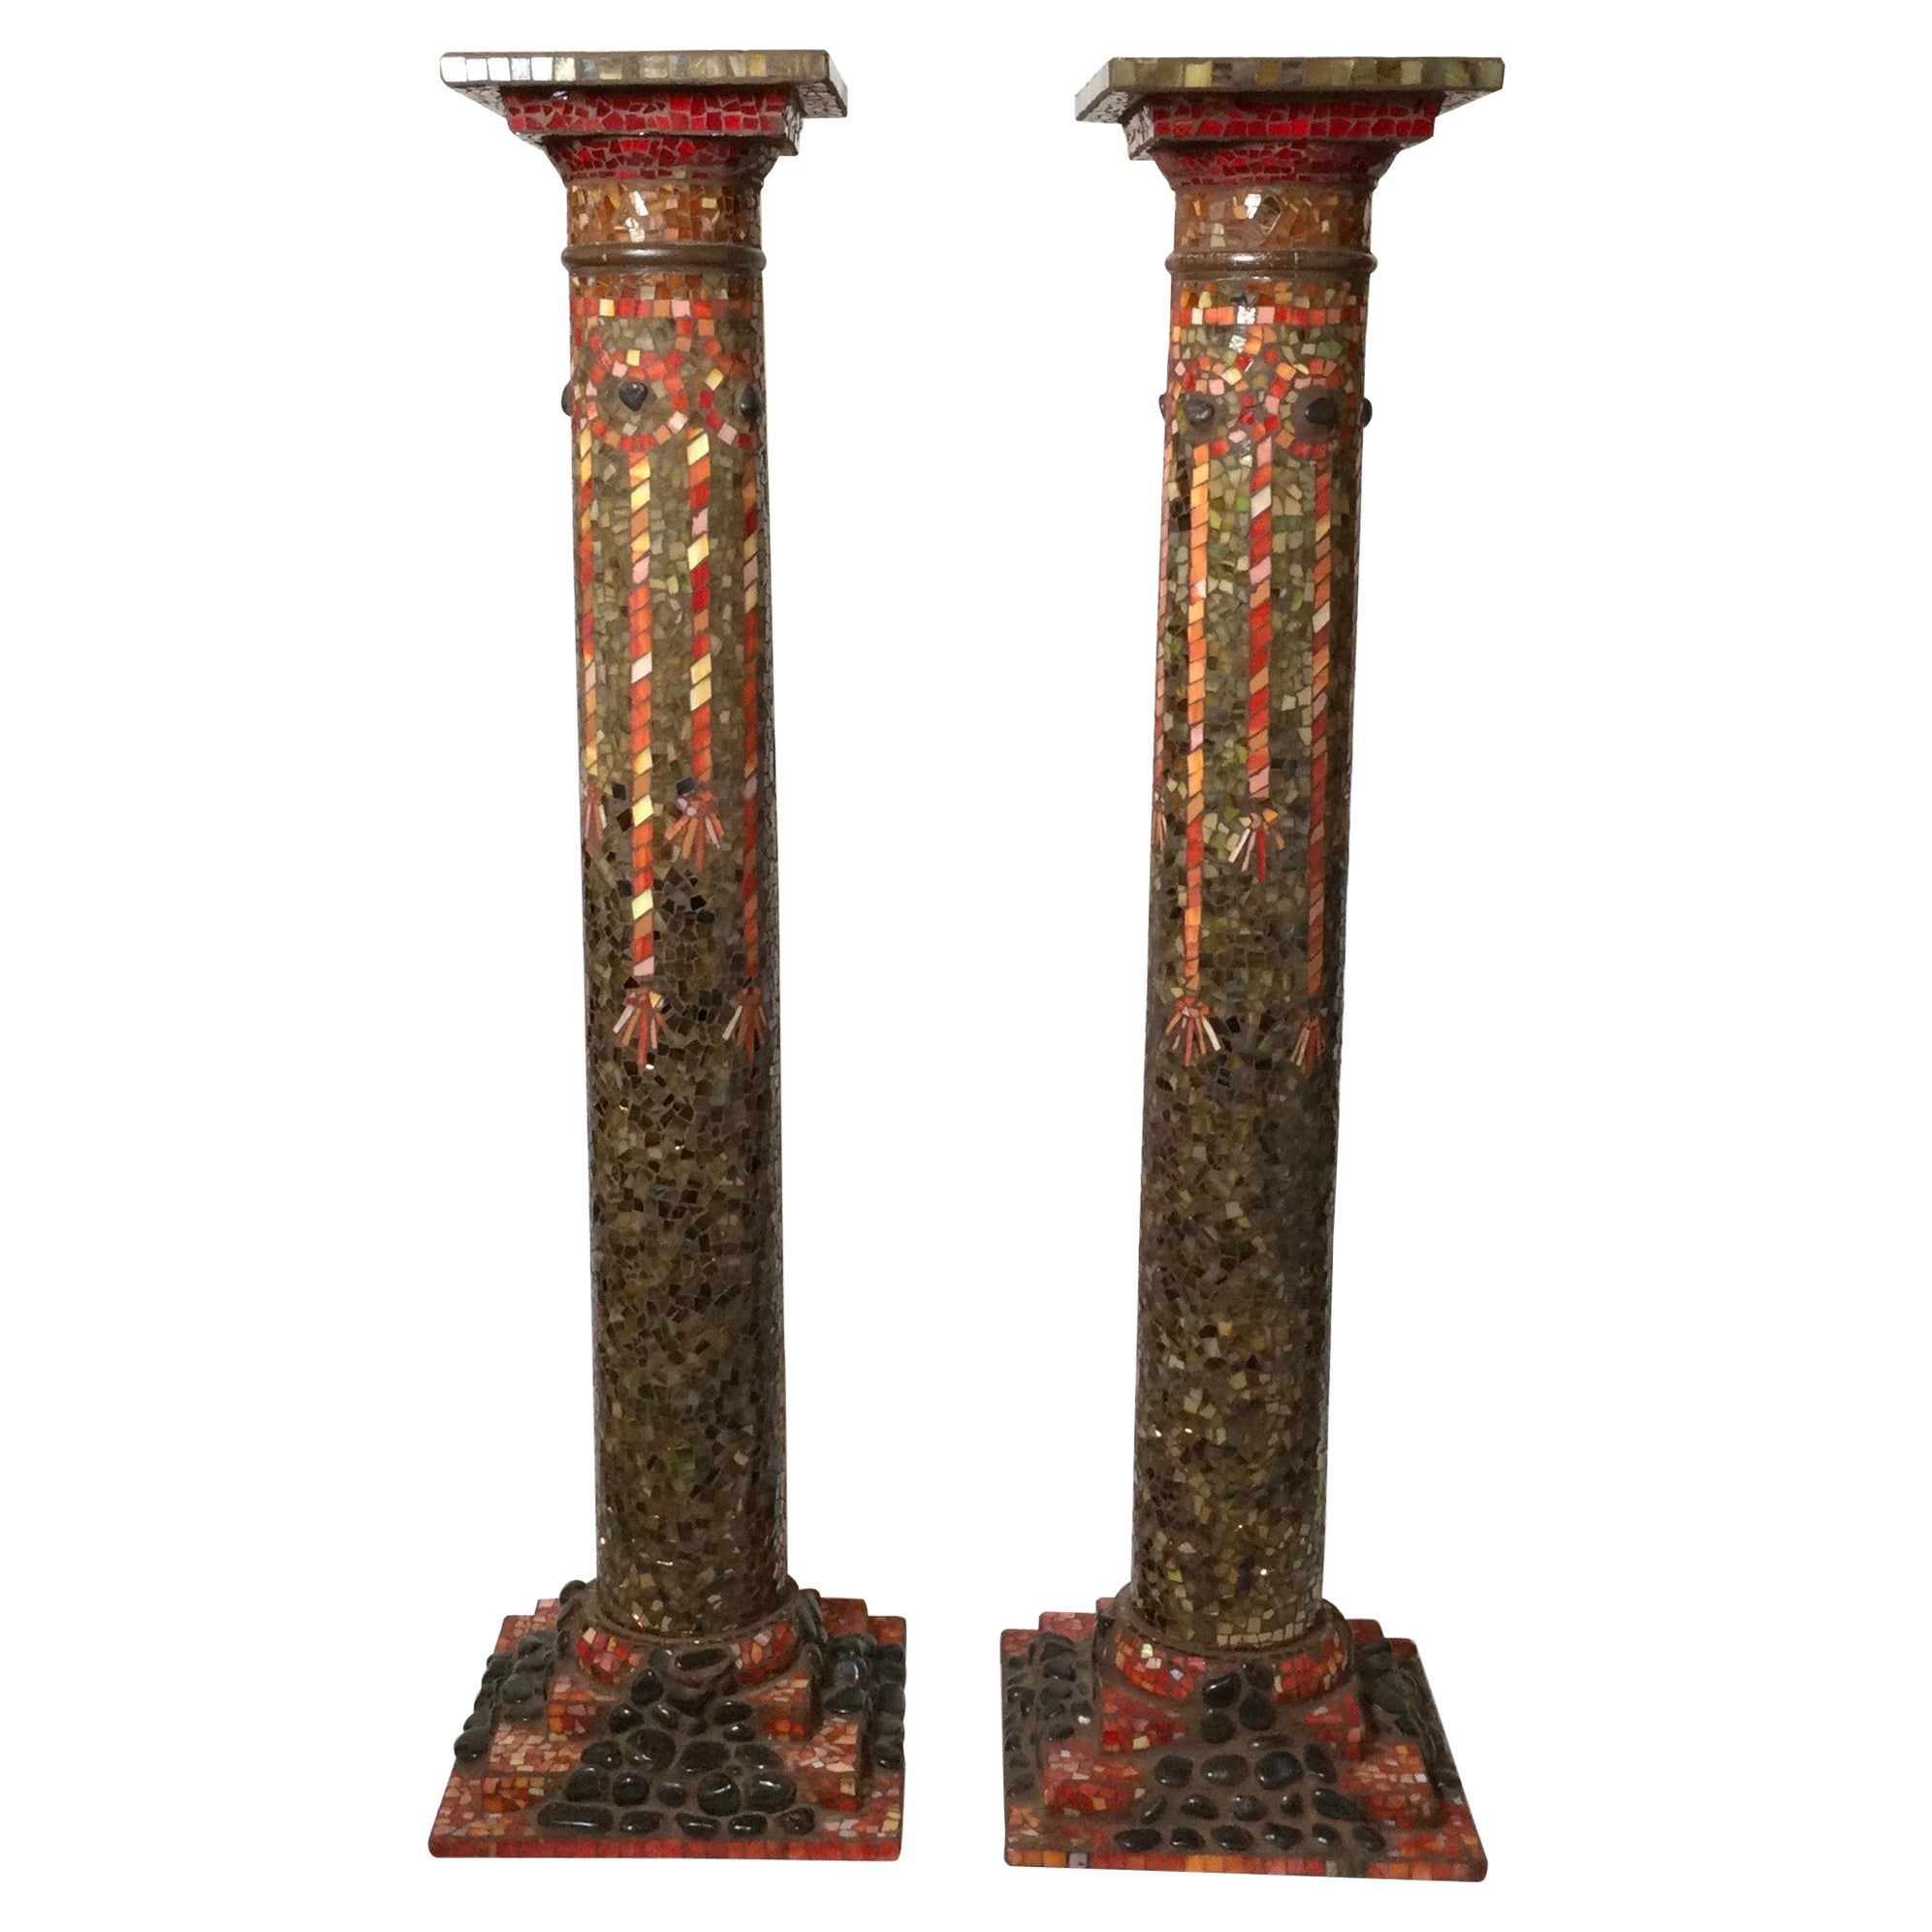 Pair of Hand Made Stone and Glass Mosaic Pedestal Columns